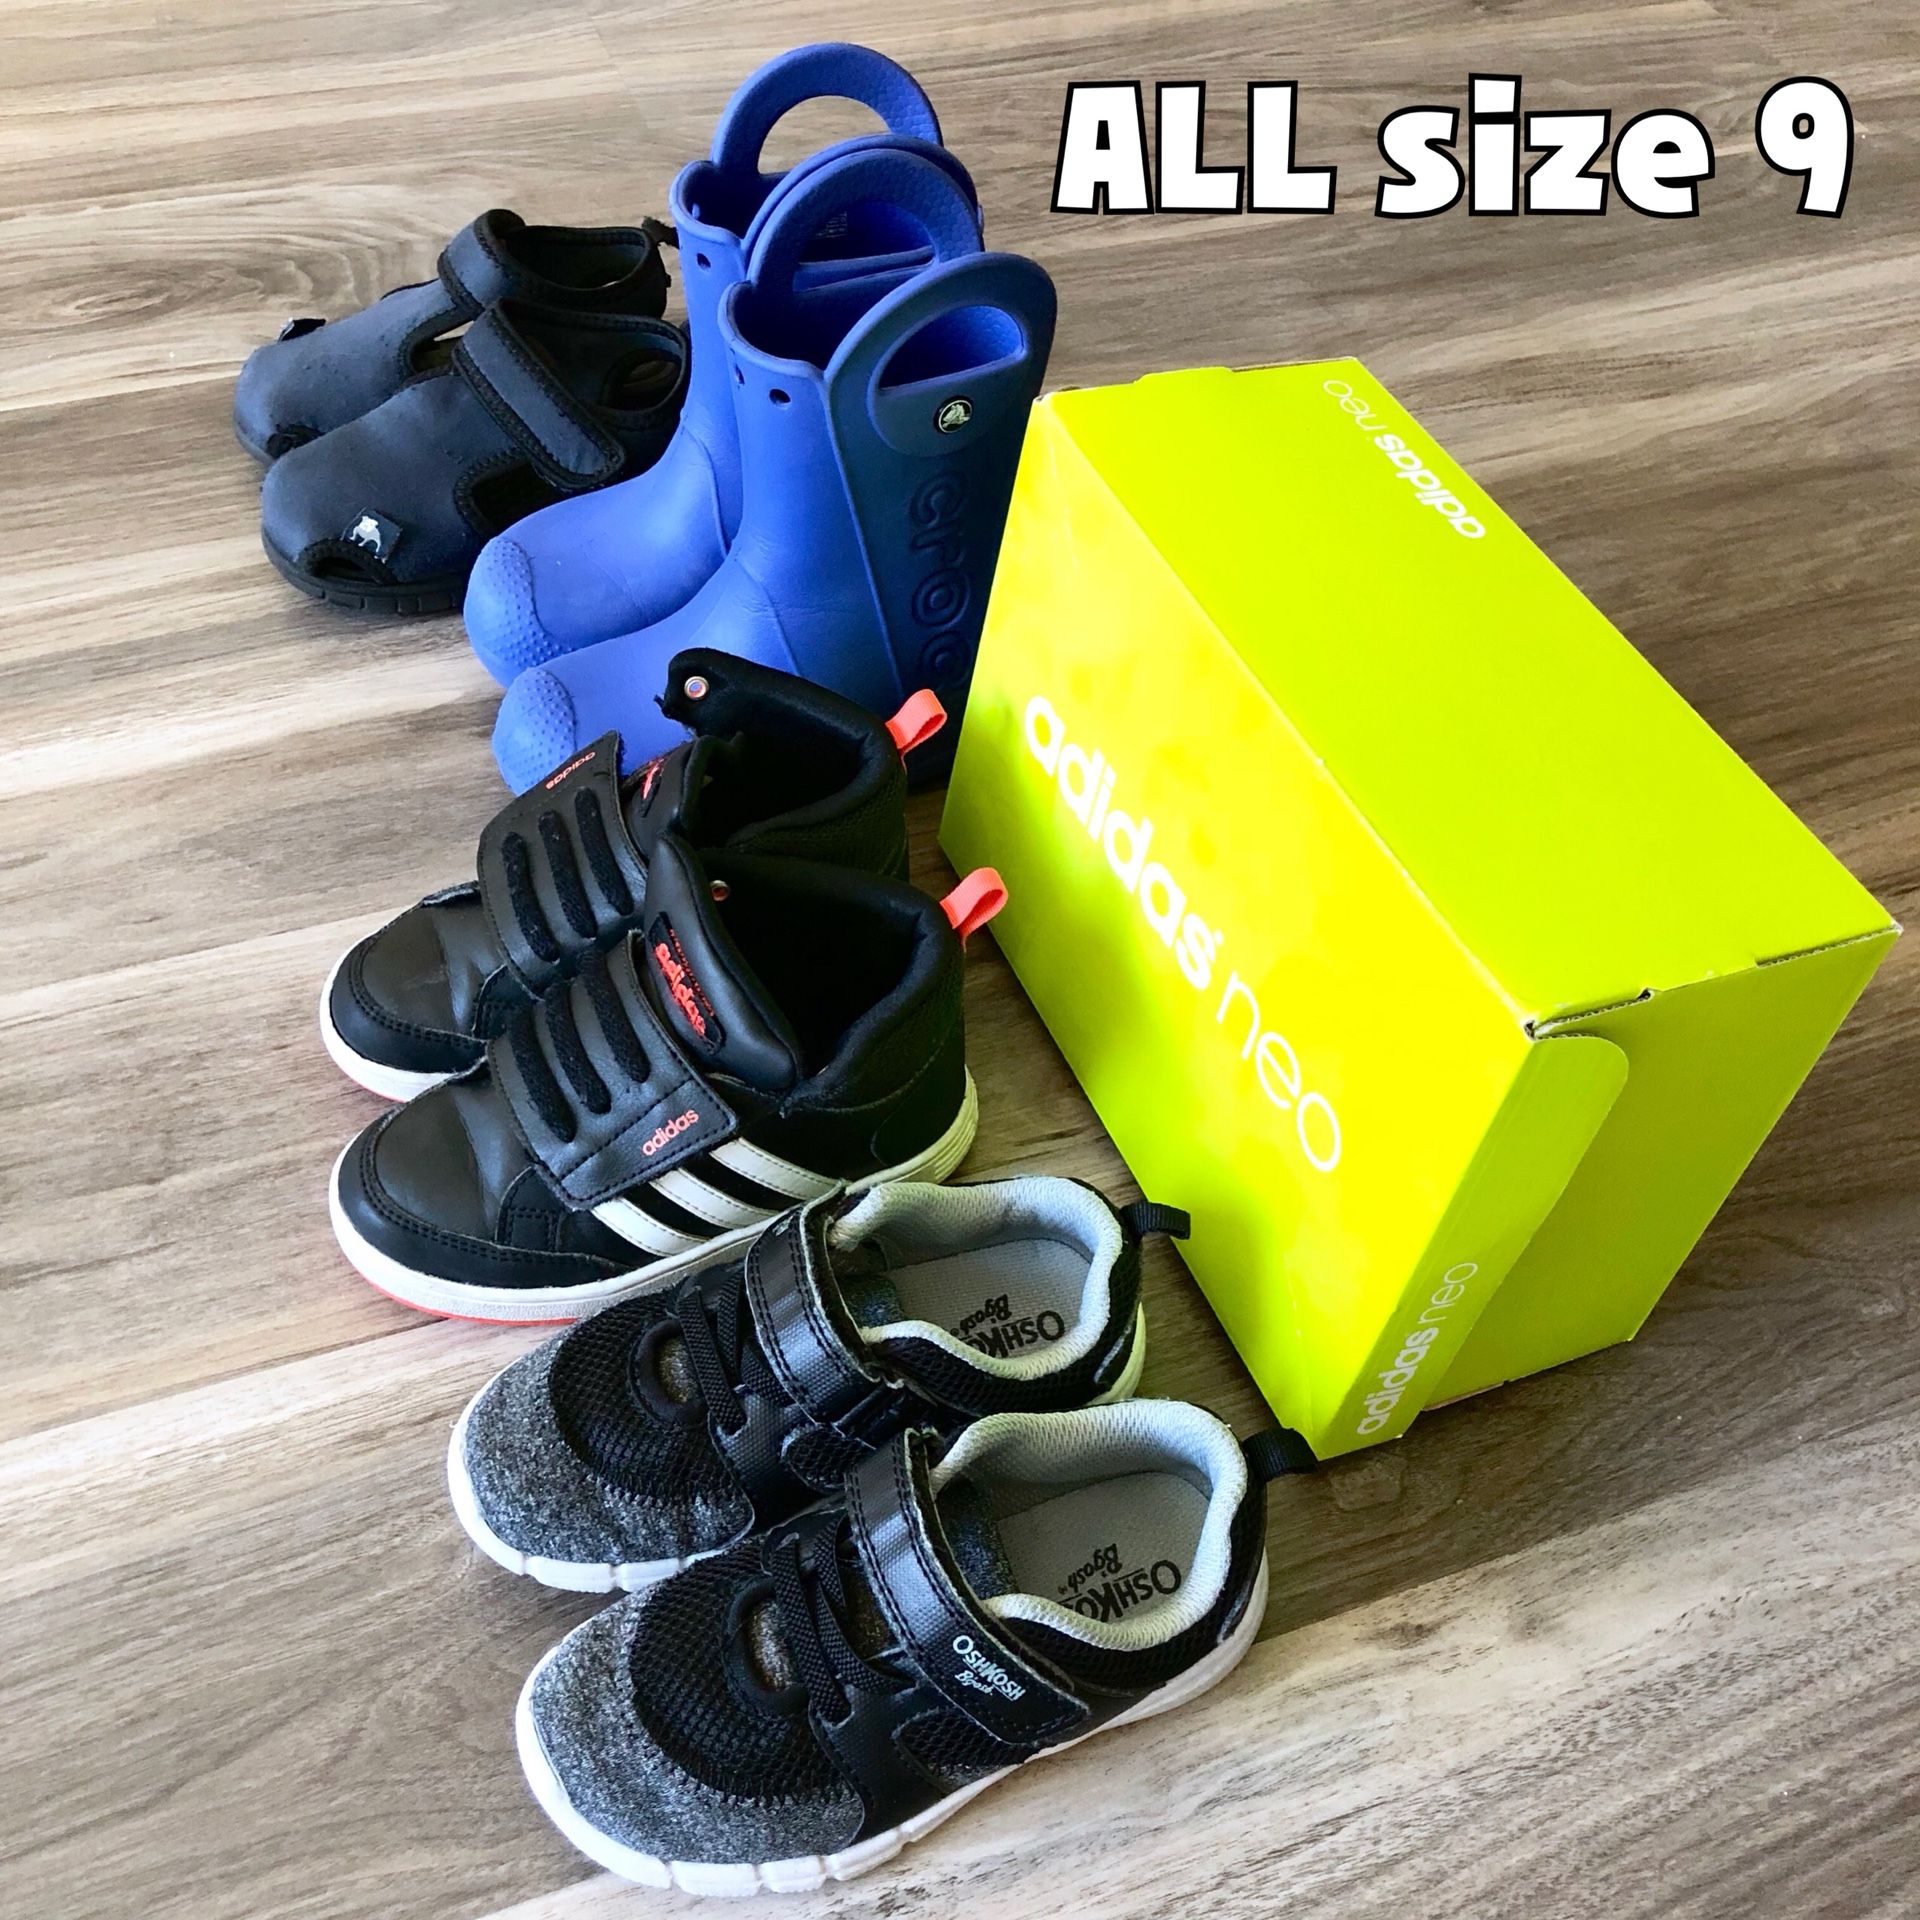 Toddler shoes sneakers boots - OshKosh, Adidas, Crocs, Bum Equipment - all size 9